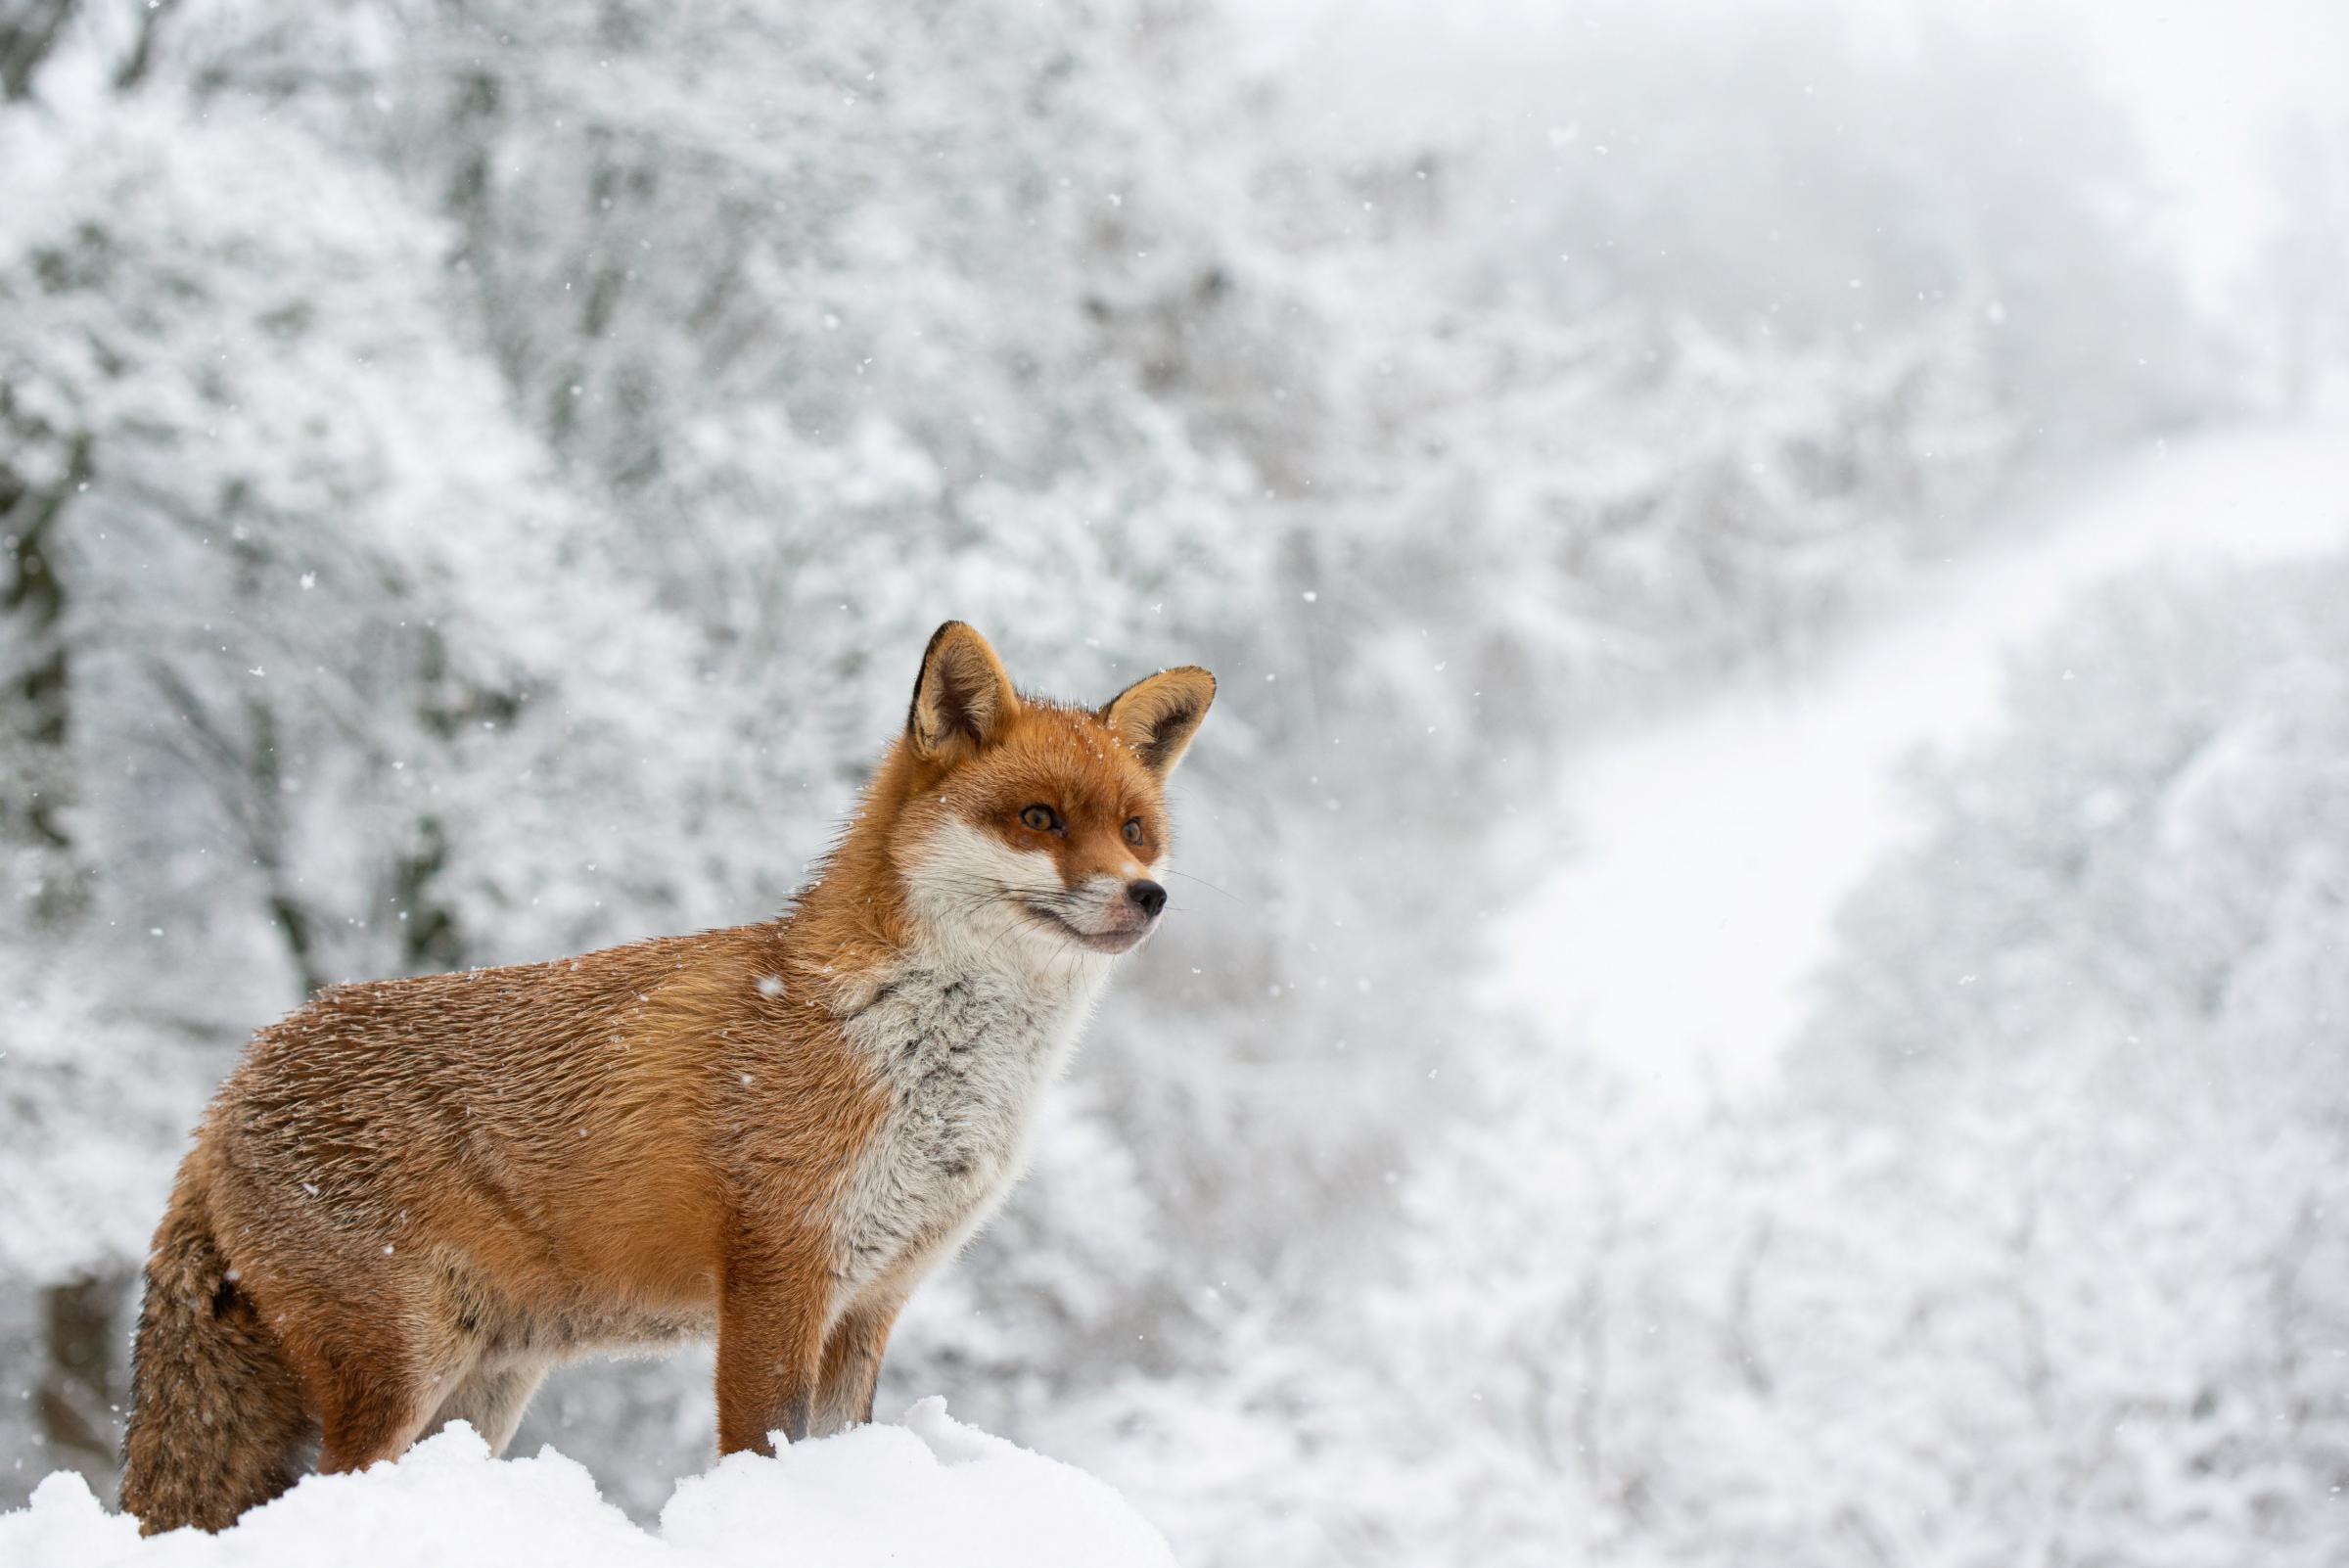 Charlie the fox. Caring Richard Bowler, who snapped these pics, has raised Charlie.